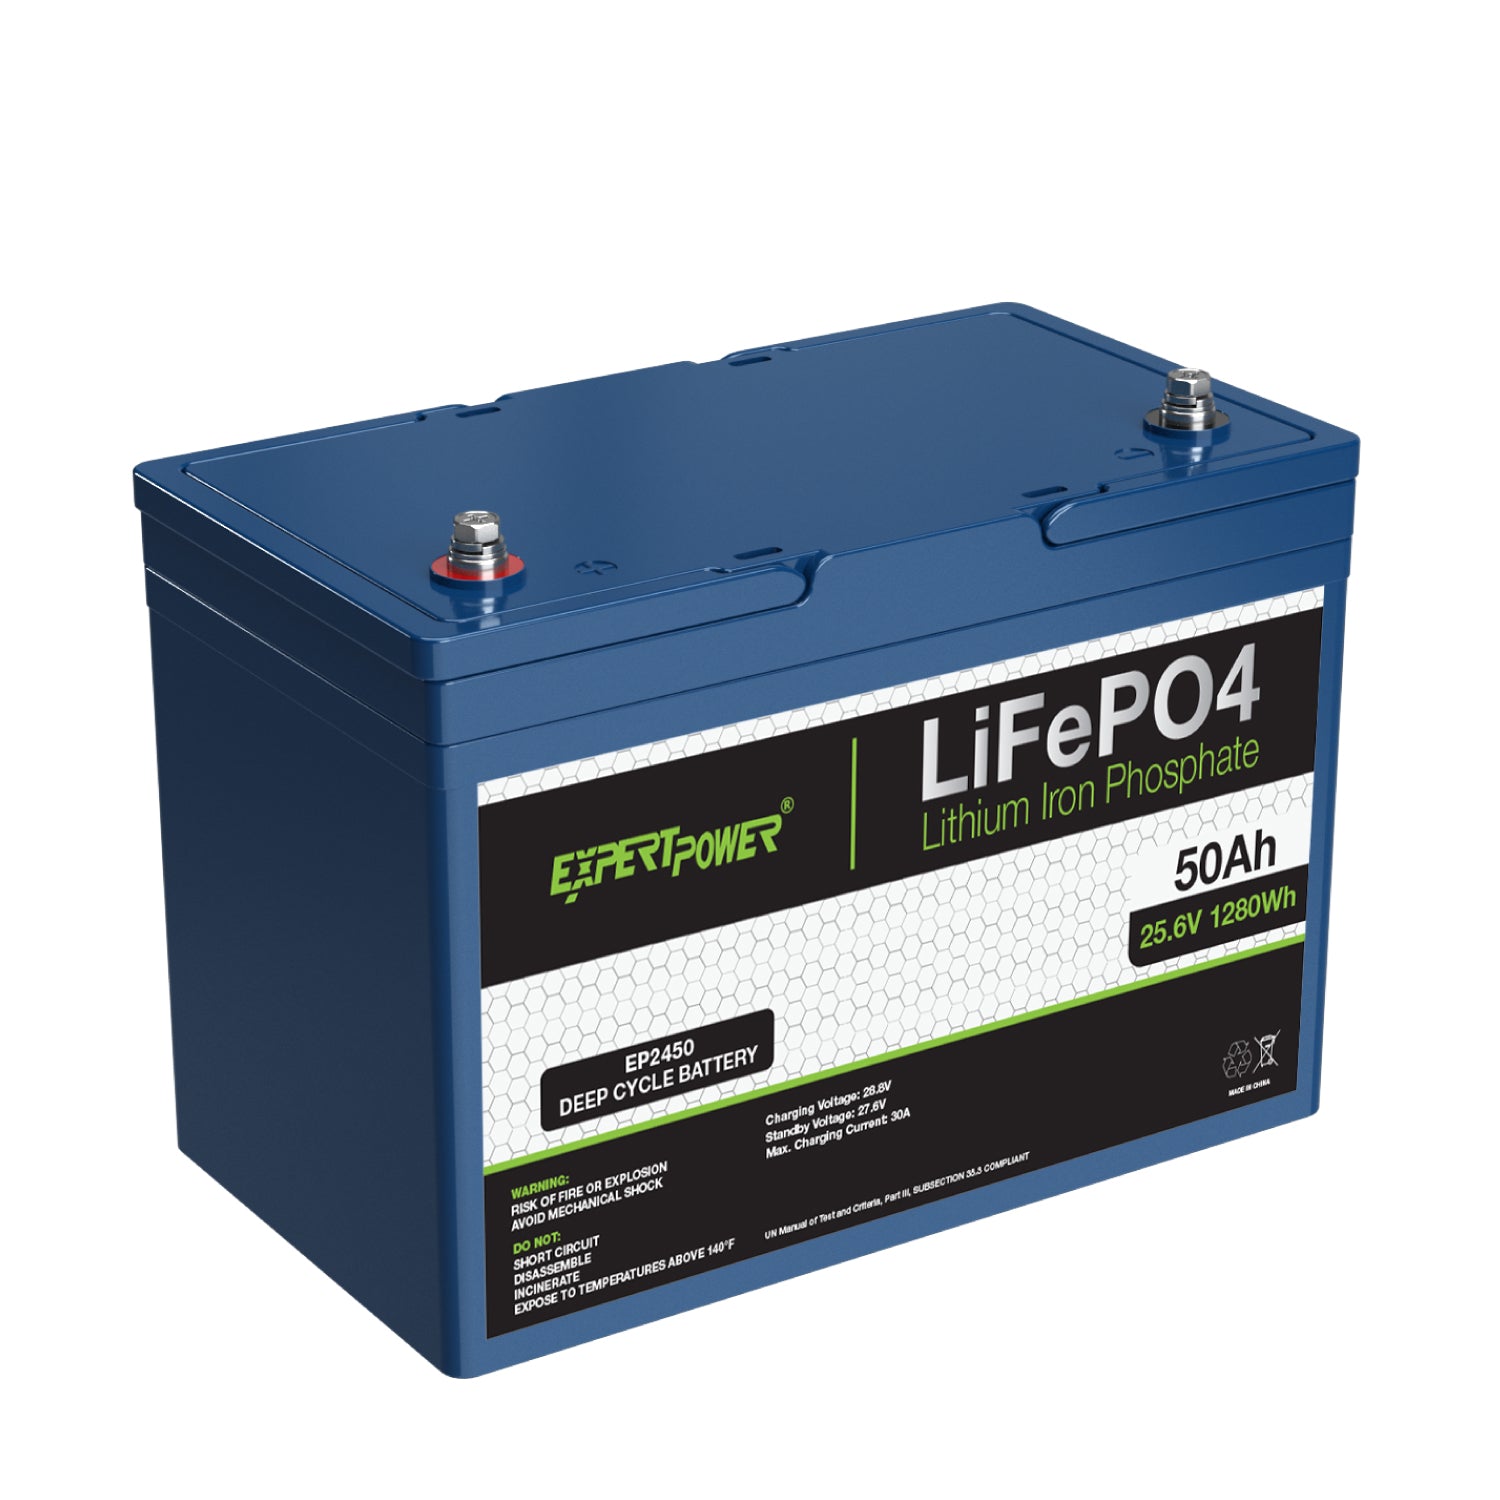 Pulstron AKNE-50, 24V 50Ah, Lithium LiFePO4 Battery Pack, In Metal Case